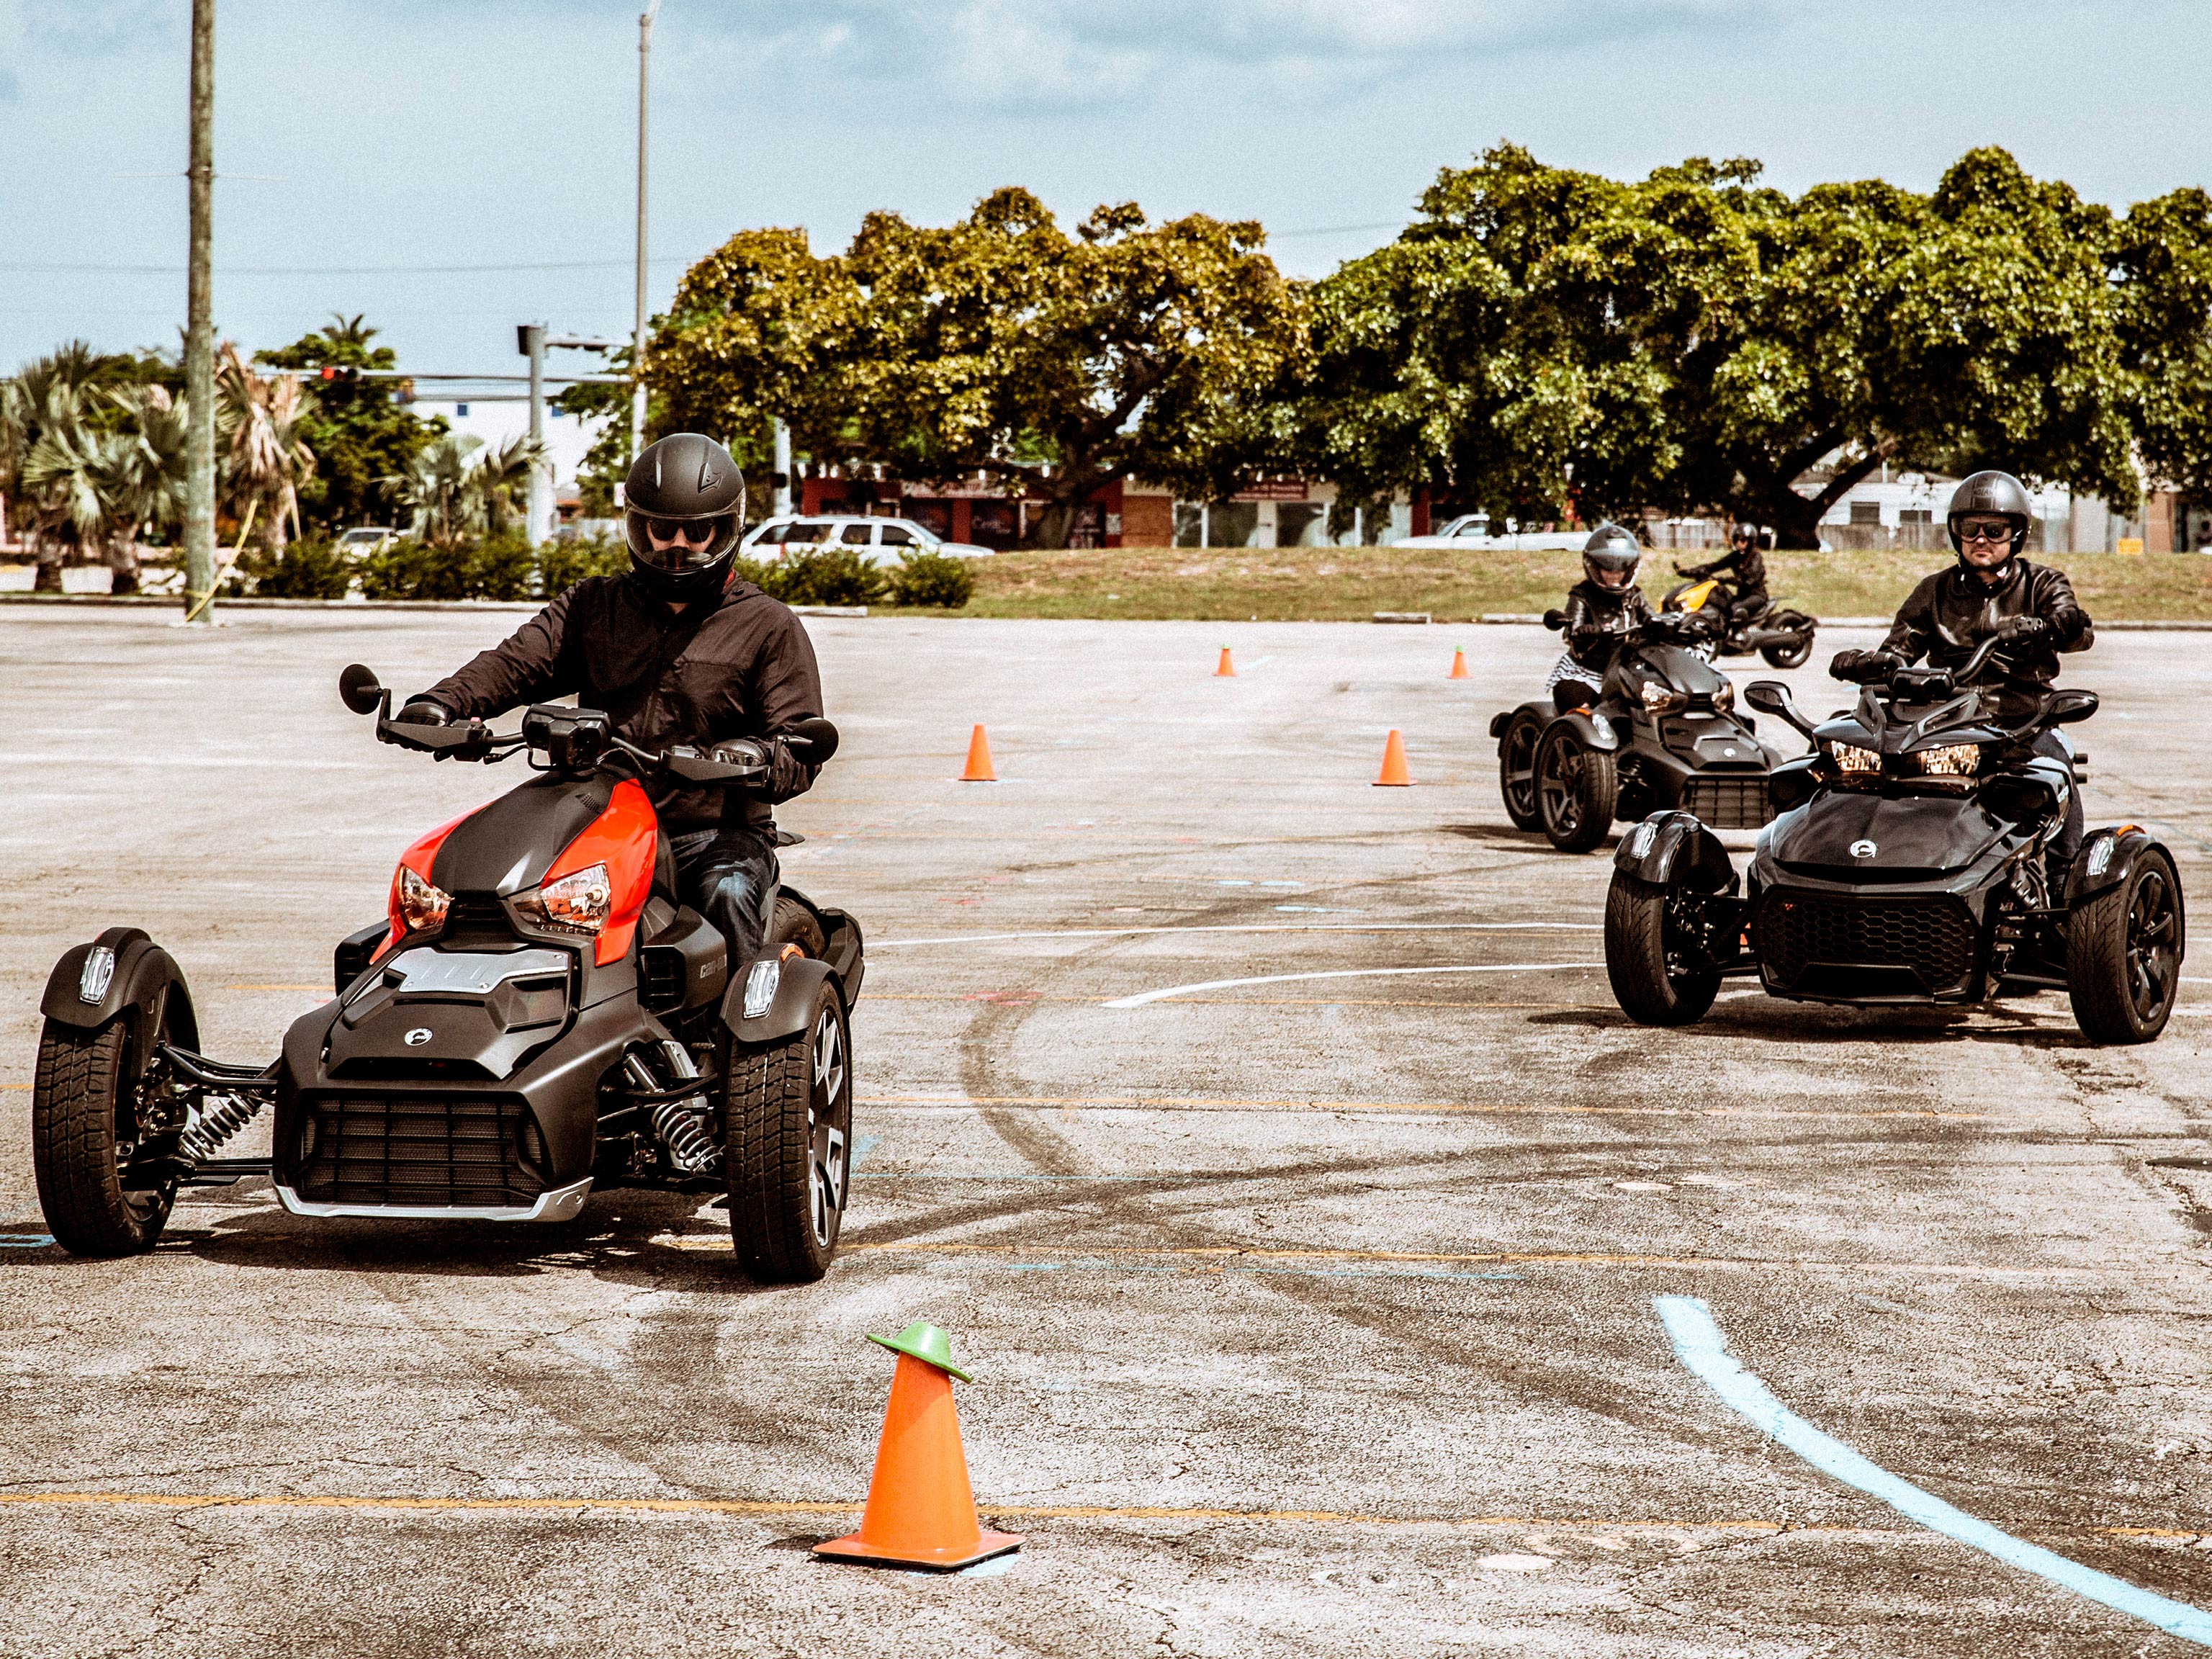 Students driver driving in between orange cones on Can-Am 3-wheel vehicles